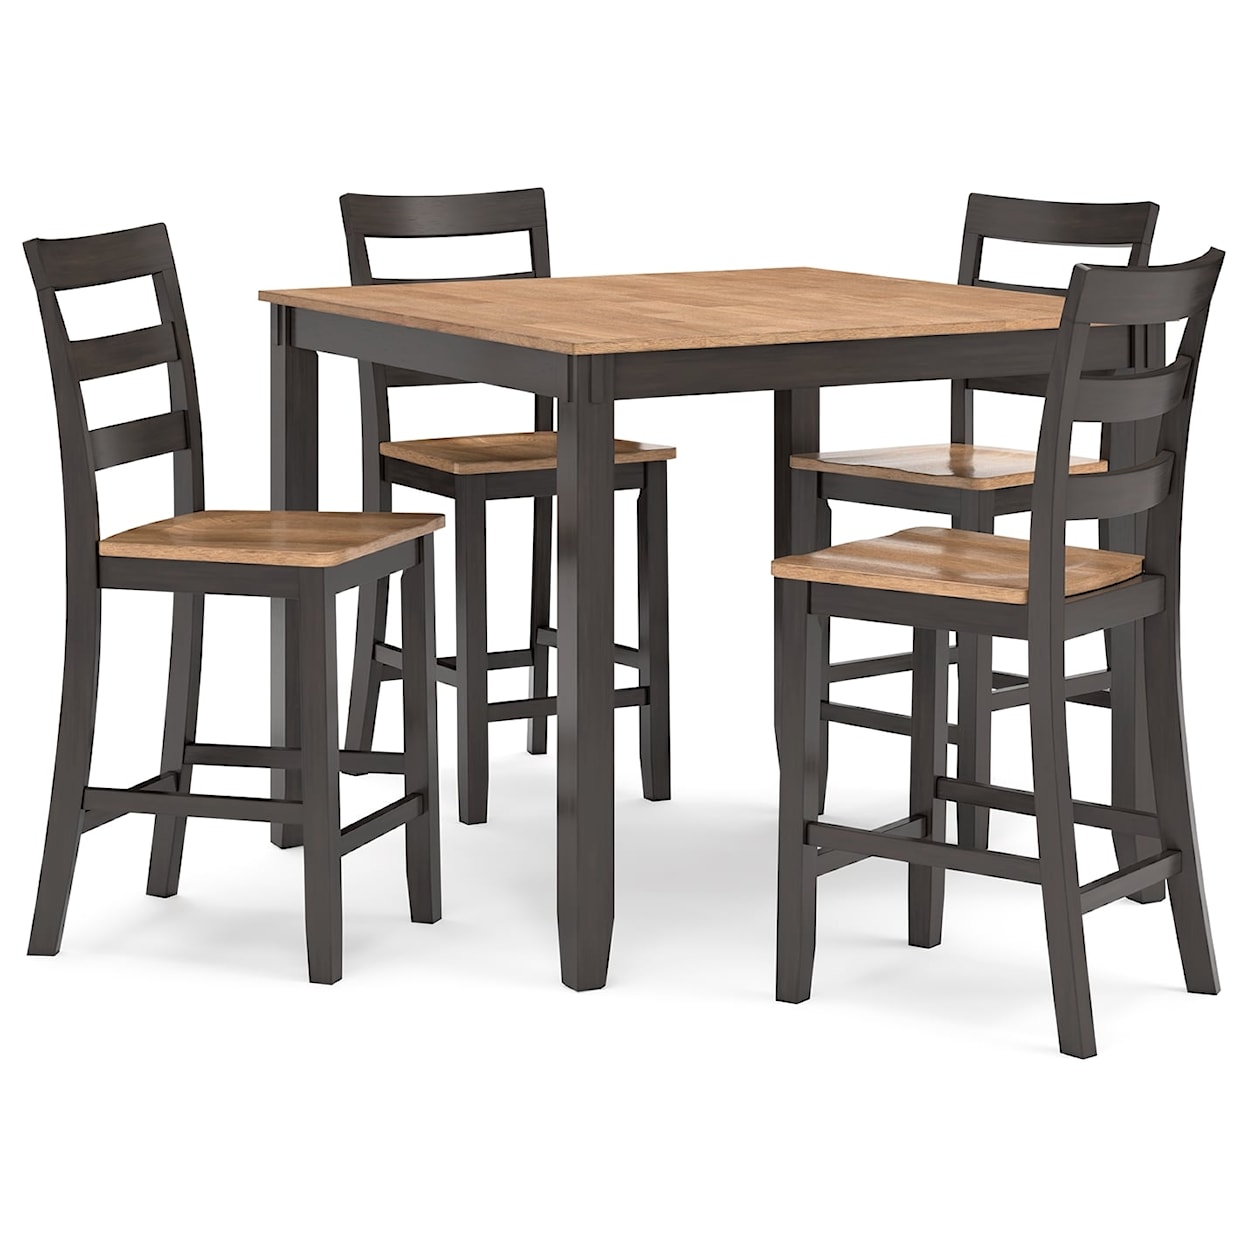 Benchcraft Gesthaven Counter Height Dining Table Set (Set Of 5)